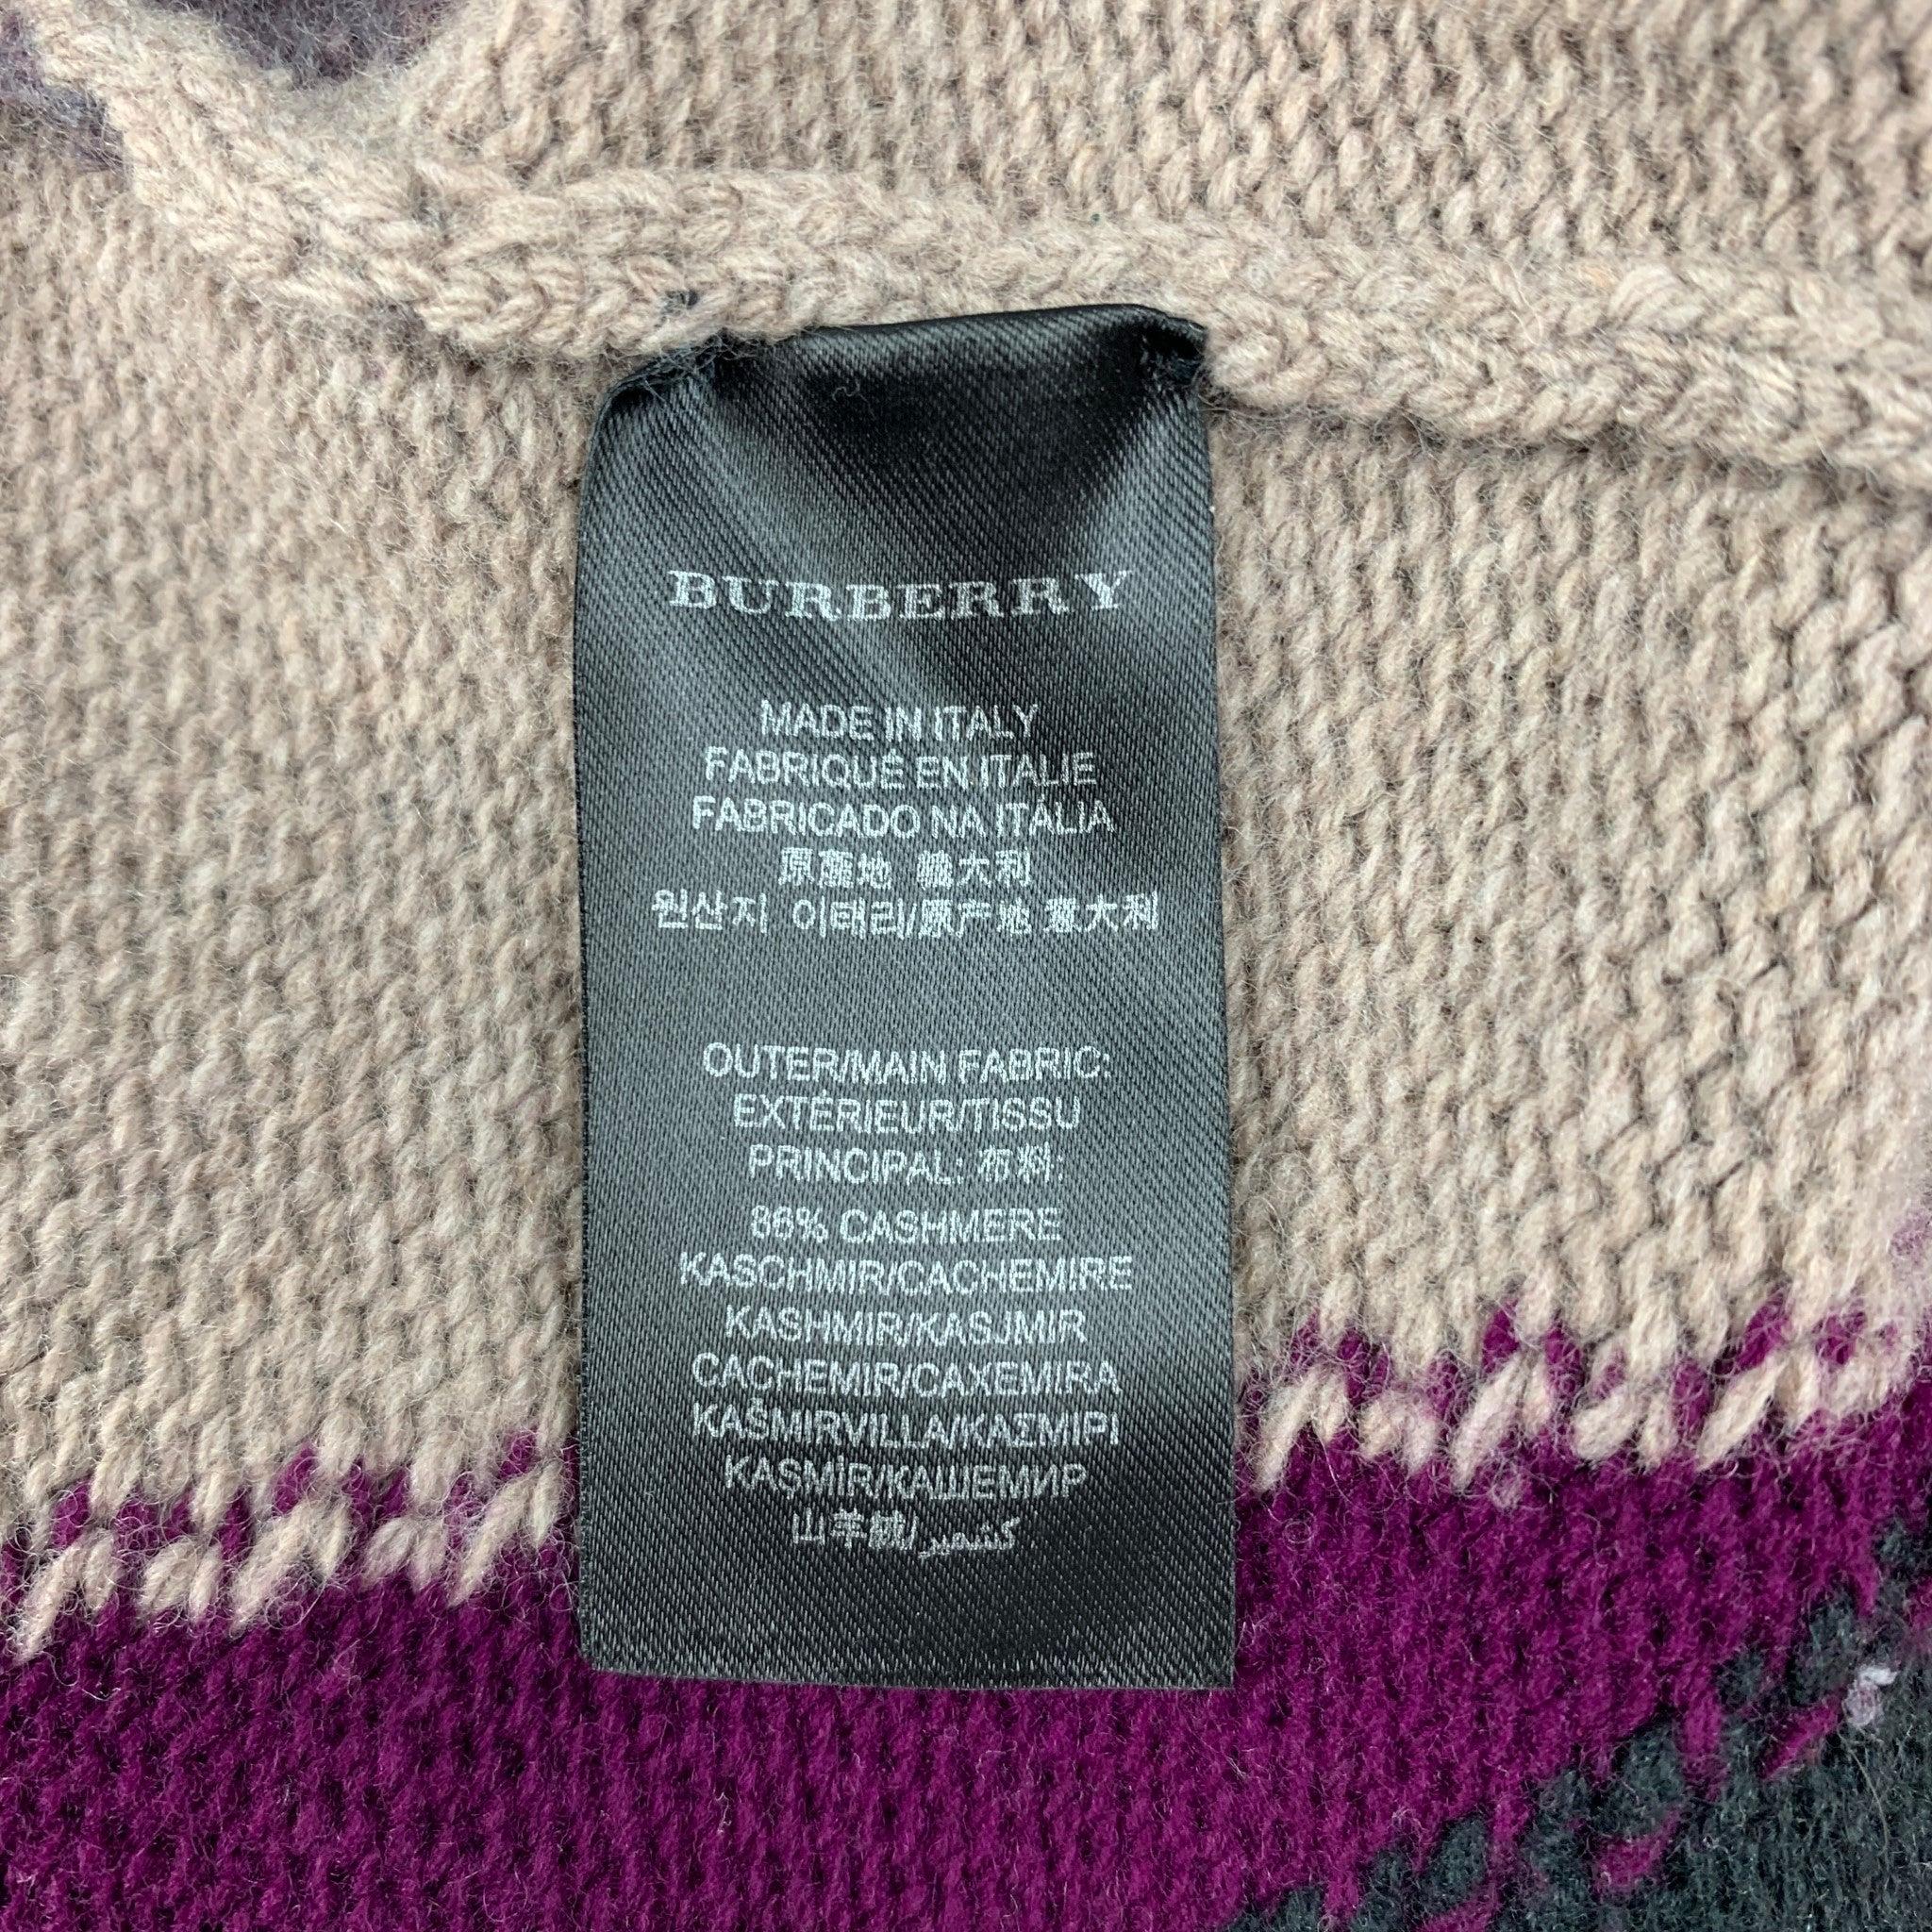 BURBERRY PRORSUM by Christopher Bailey Multi-Color Cashmere Cowl Neck Sweater 1